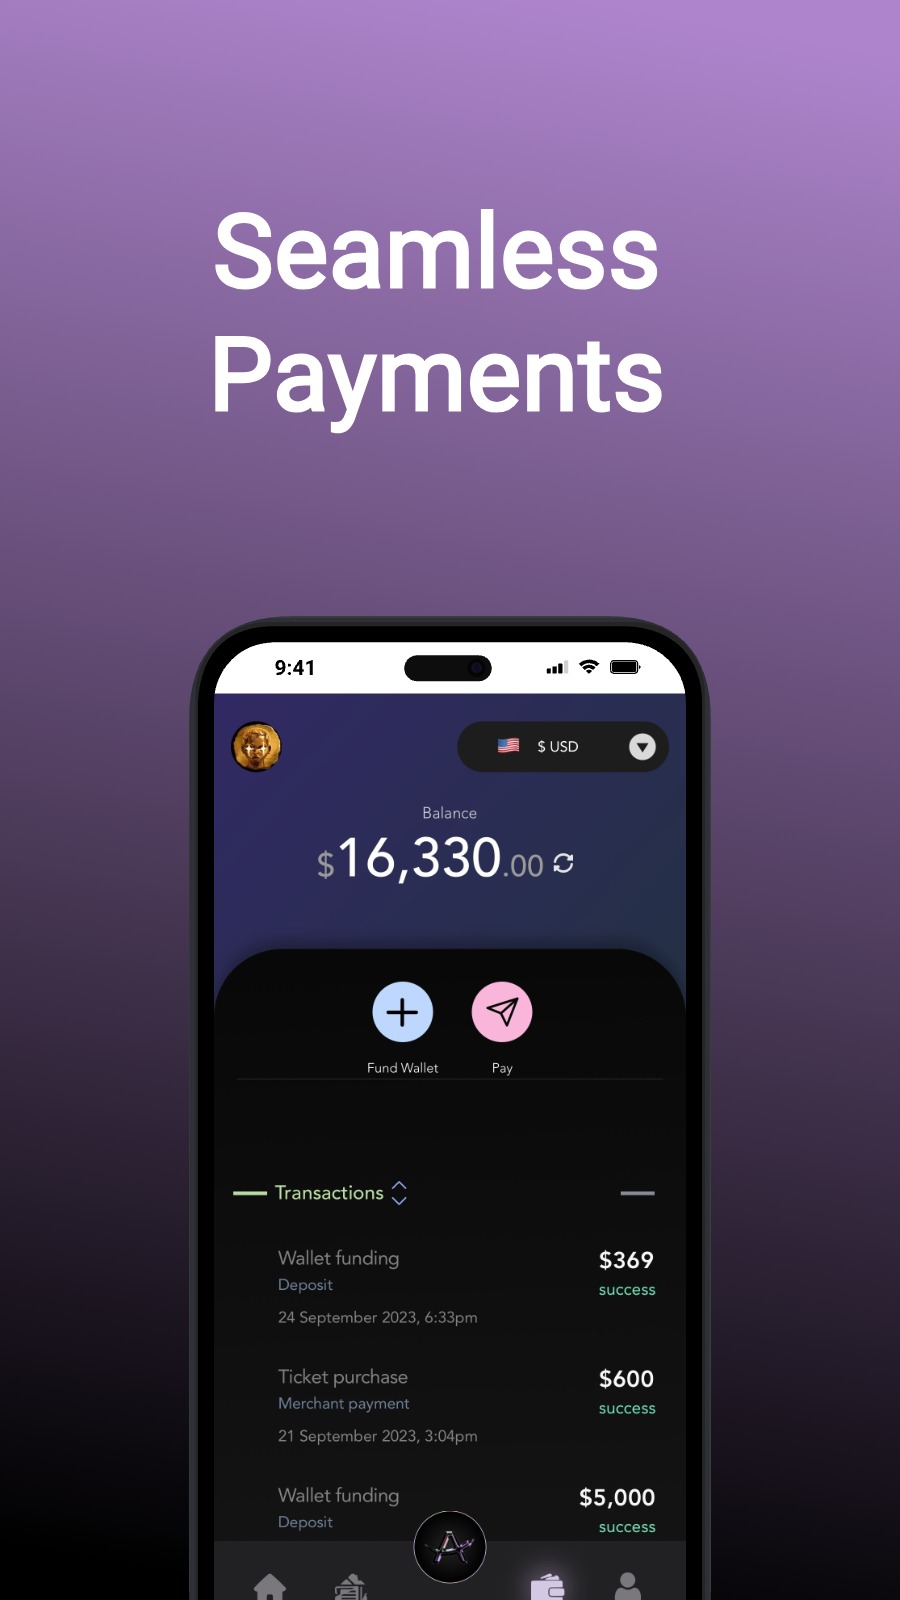 Seamless Payments